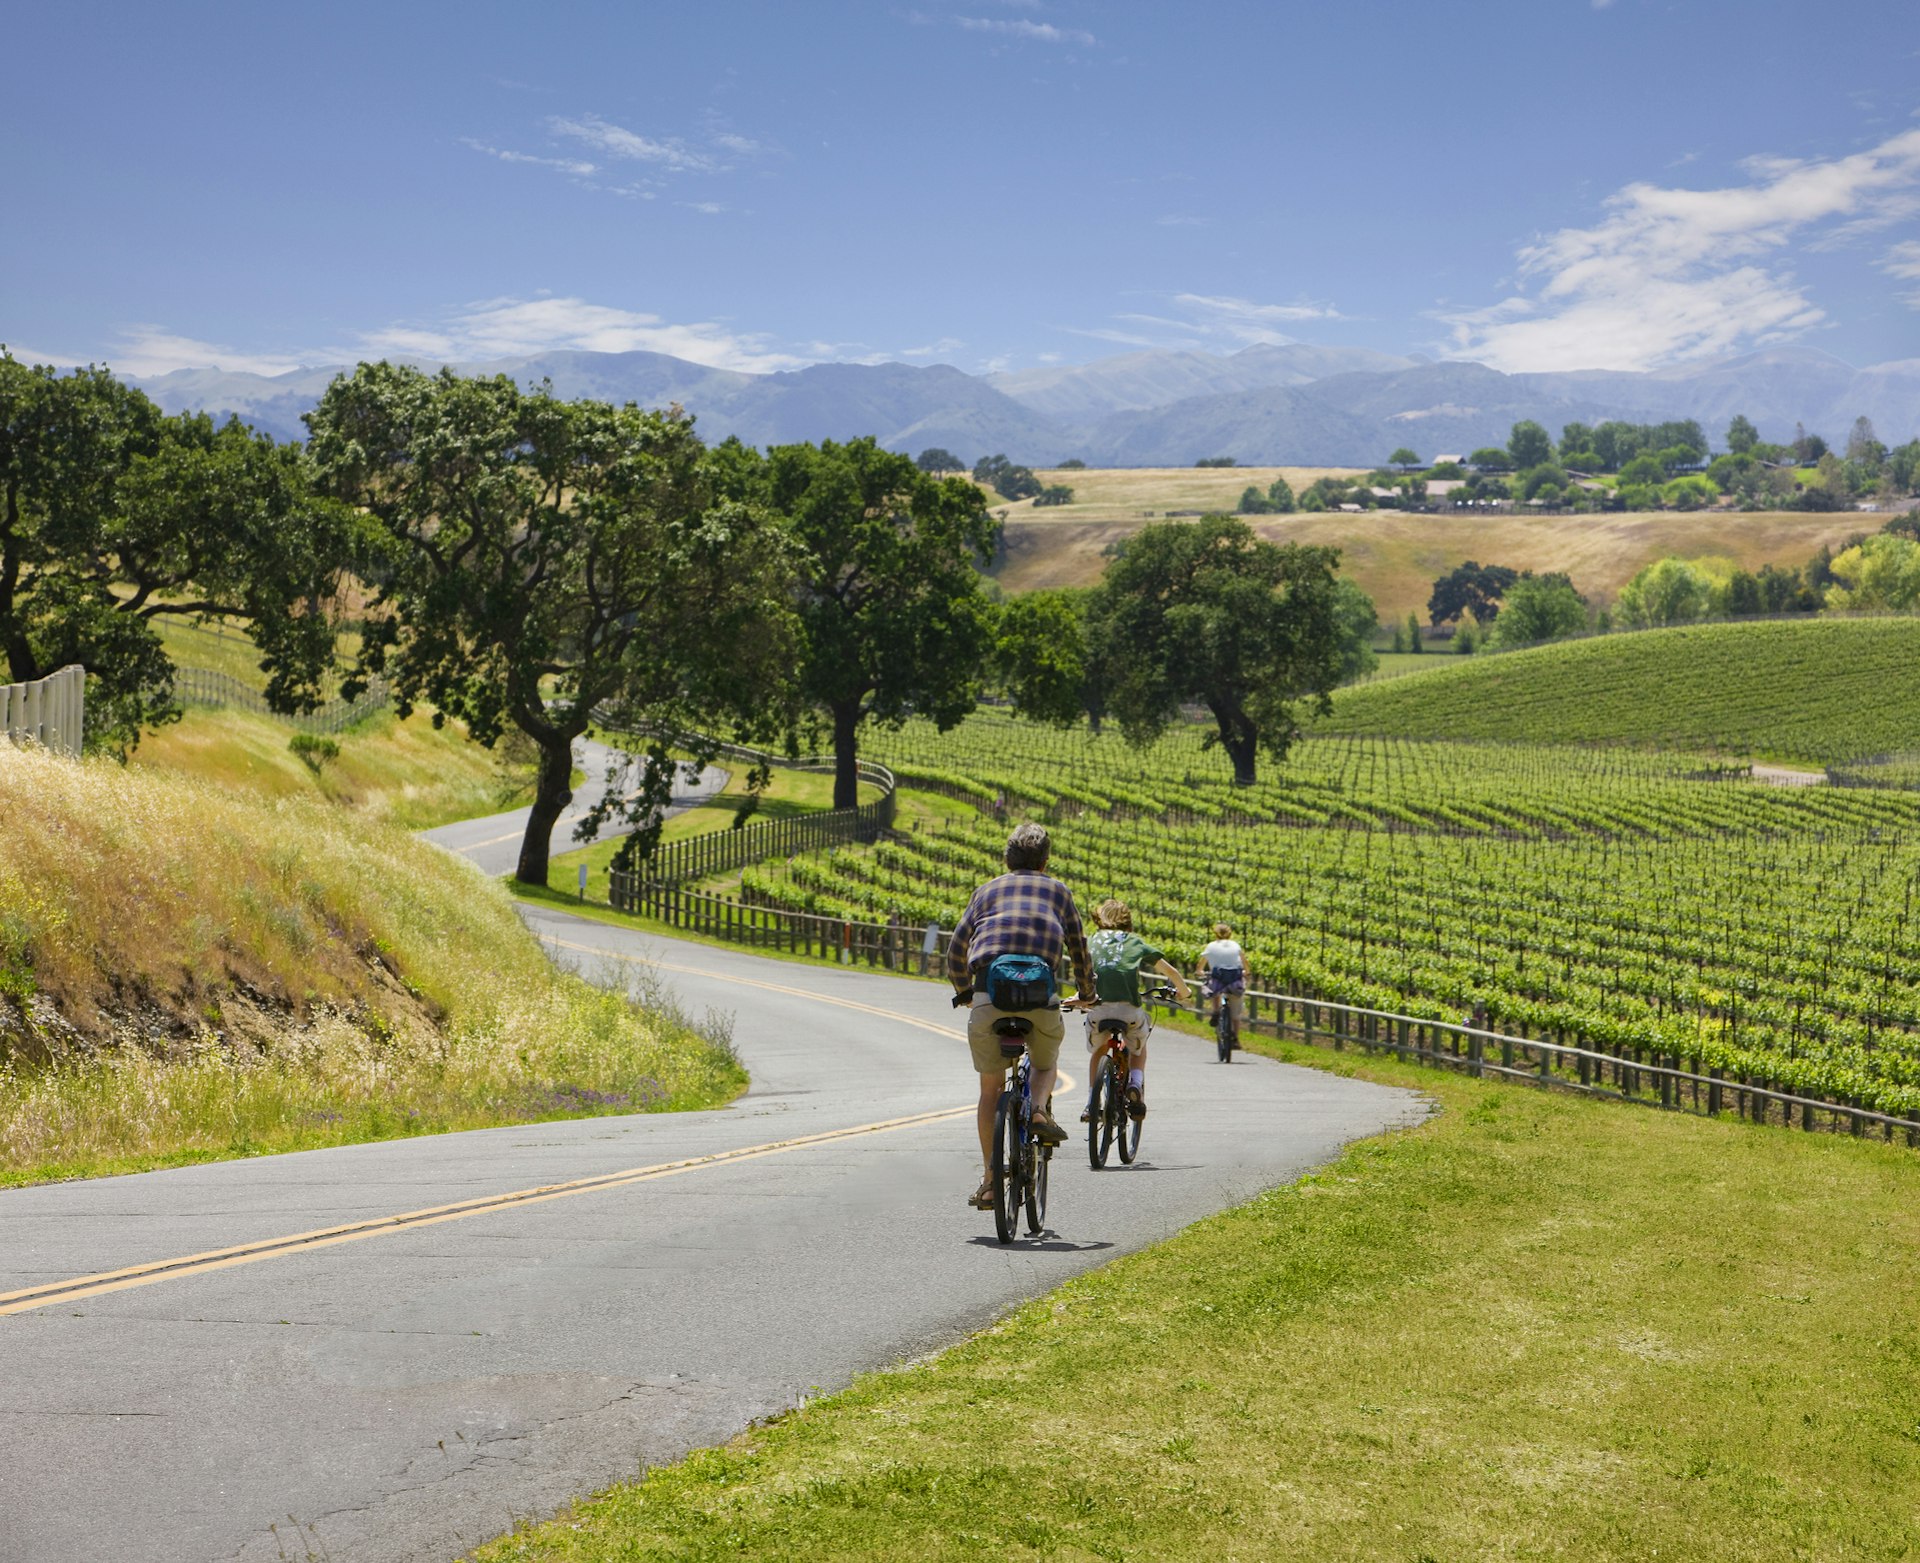 Three people ride bikes down a road through beautiful vineyards that stretch into the distance